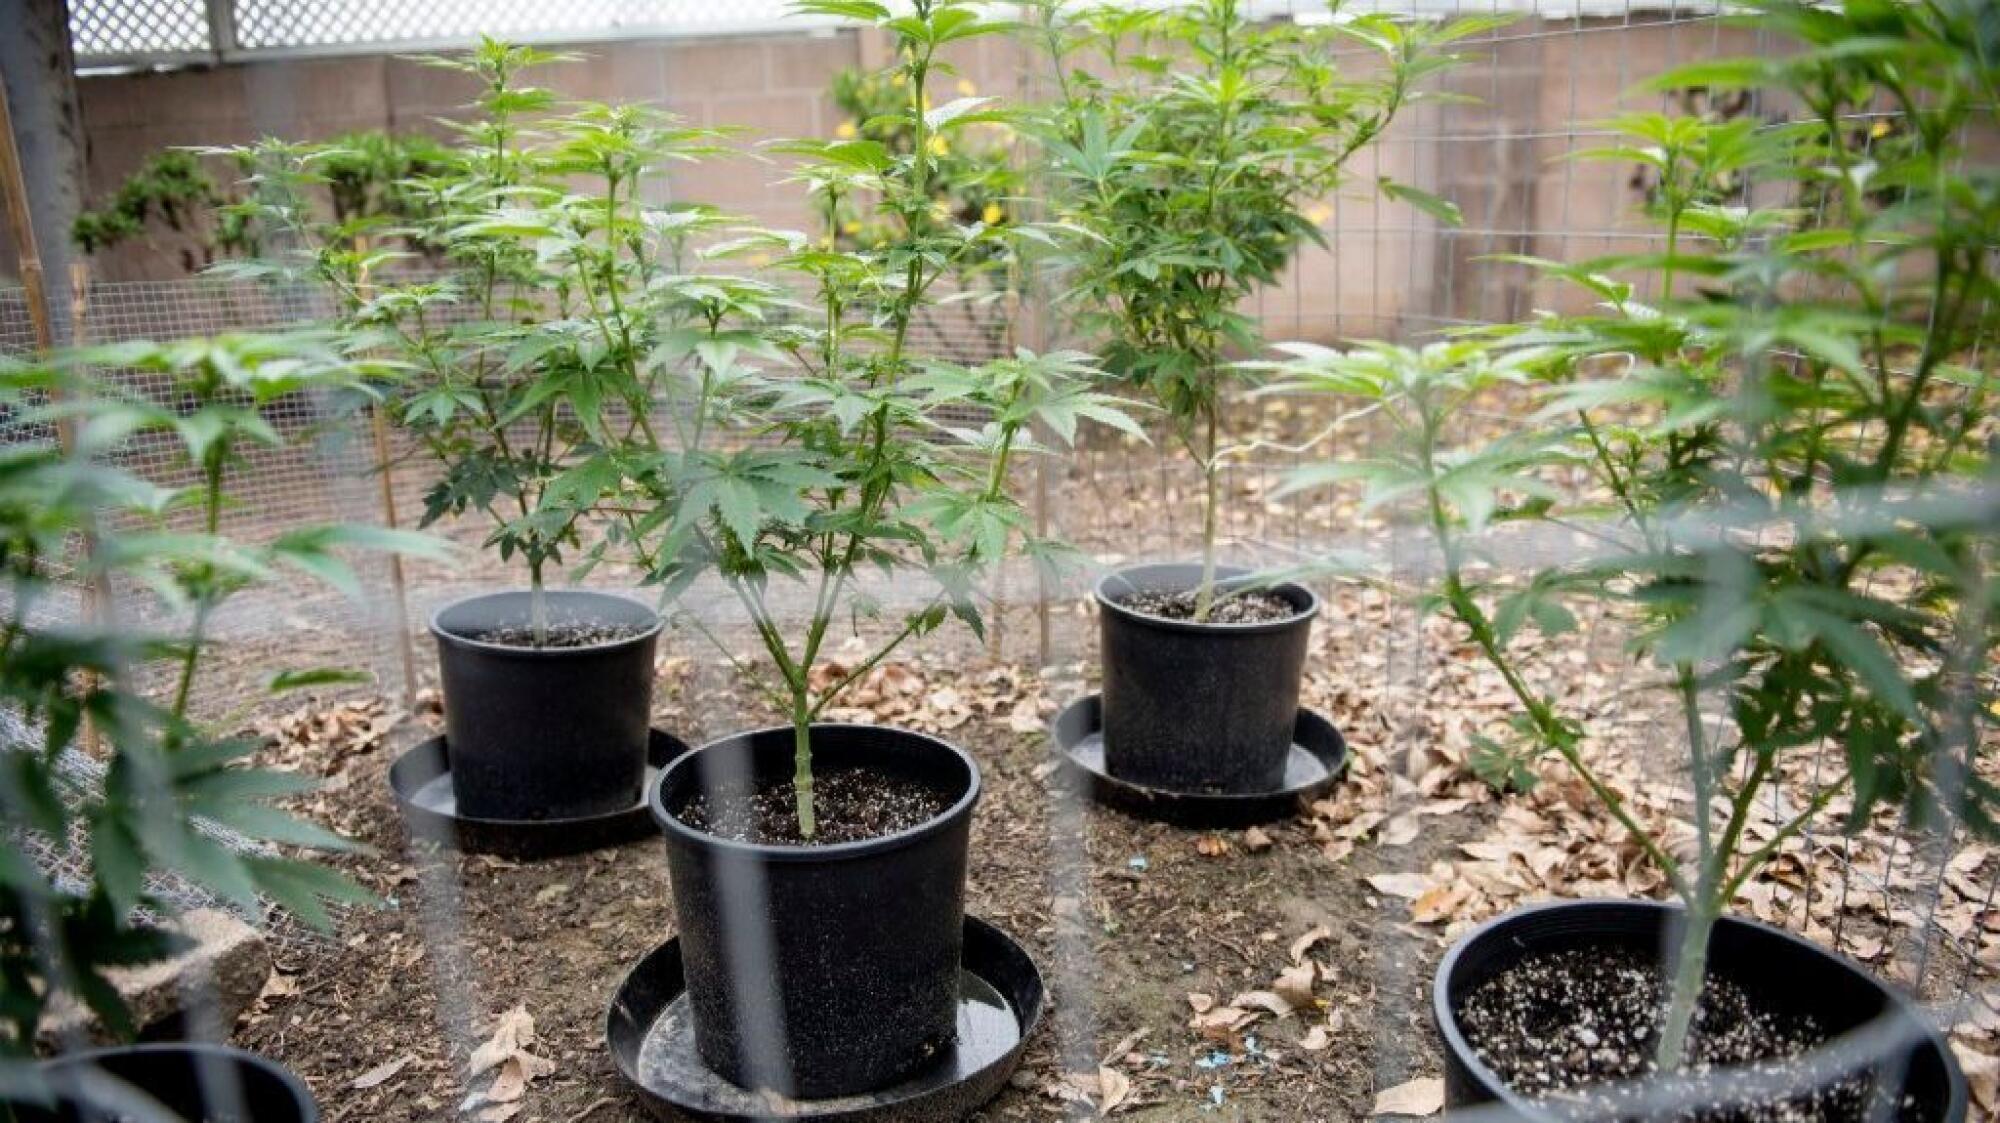 Five cannabis plants grow in the backyard of a Southern California resident.